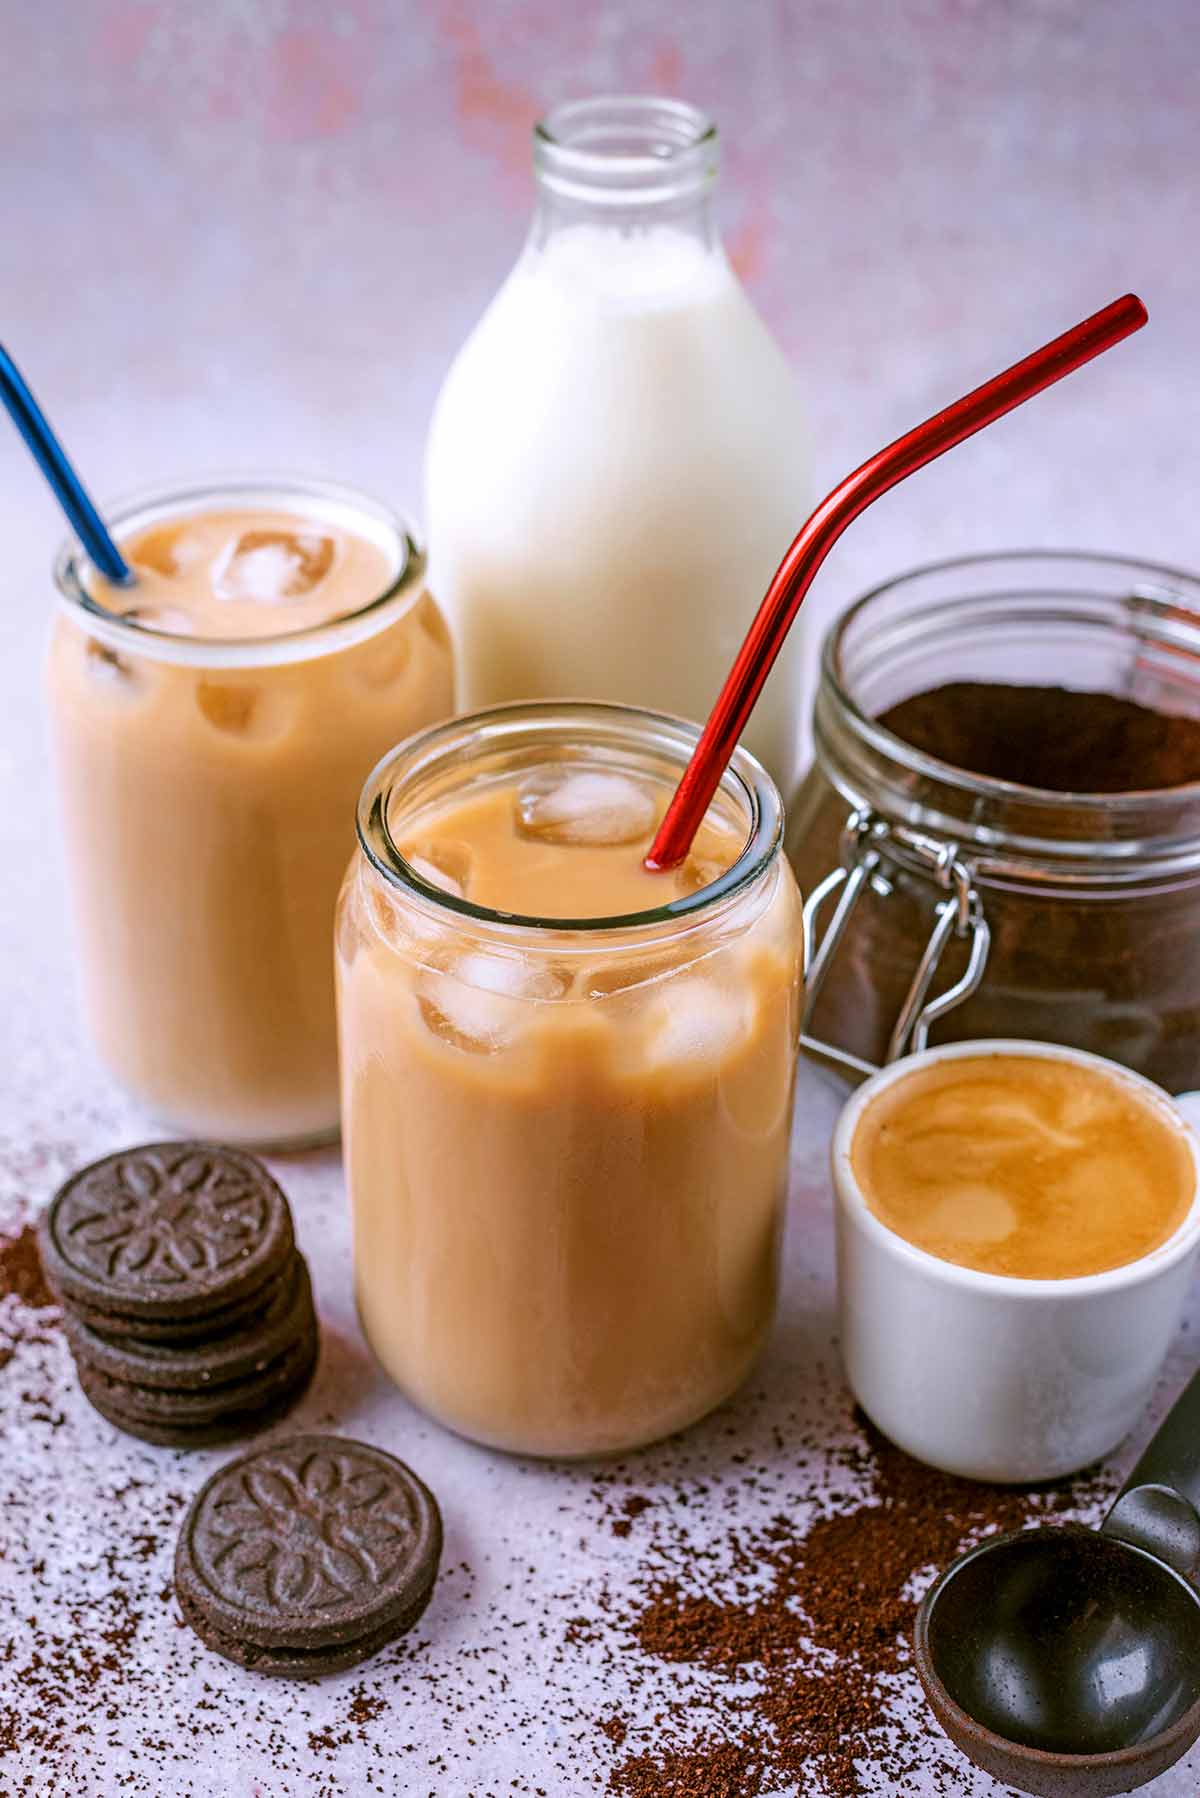 Two glasses of iced coffee in front of some milk and ground coffee.